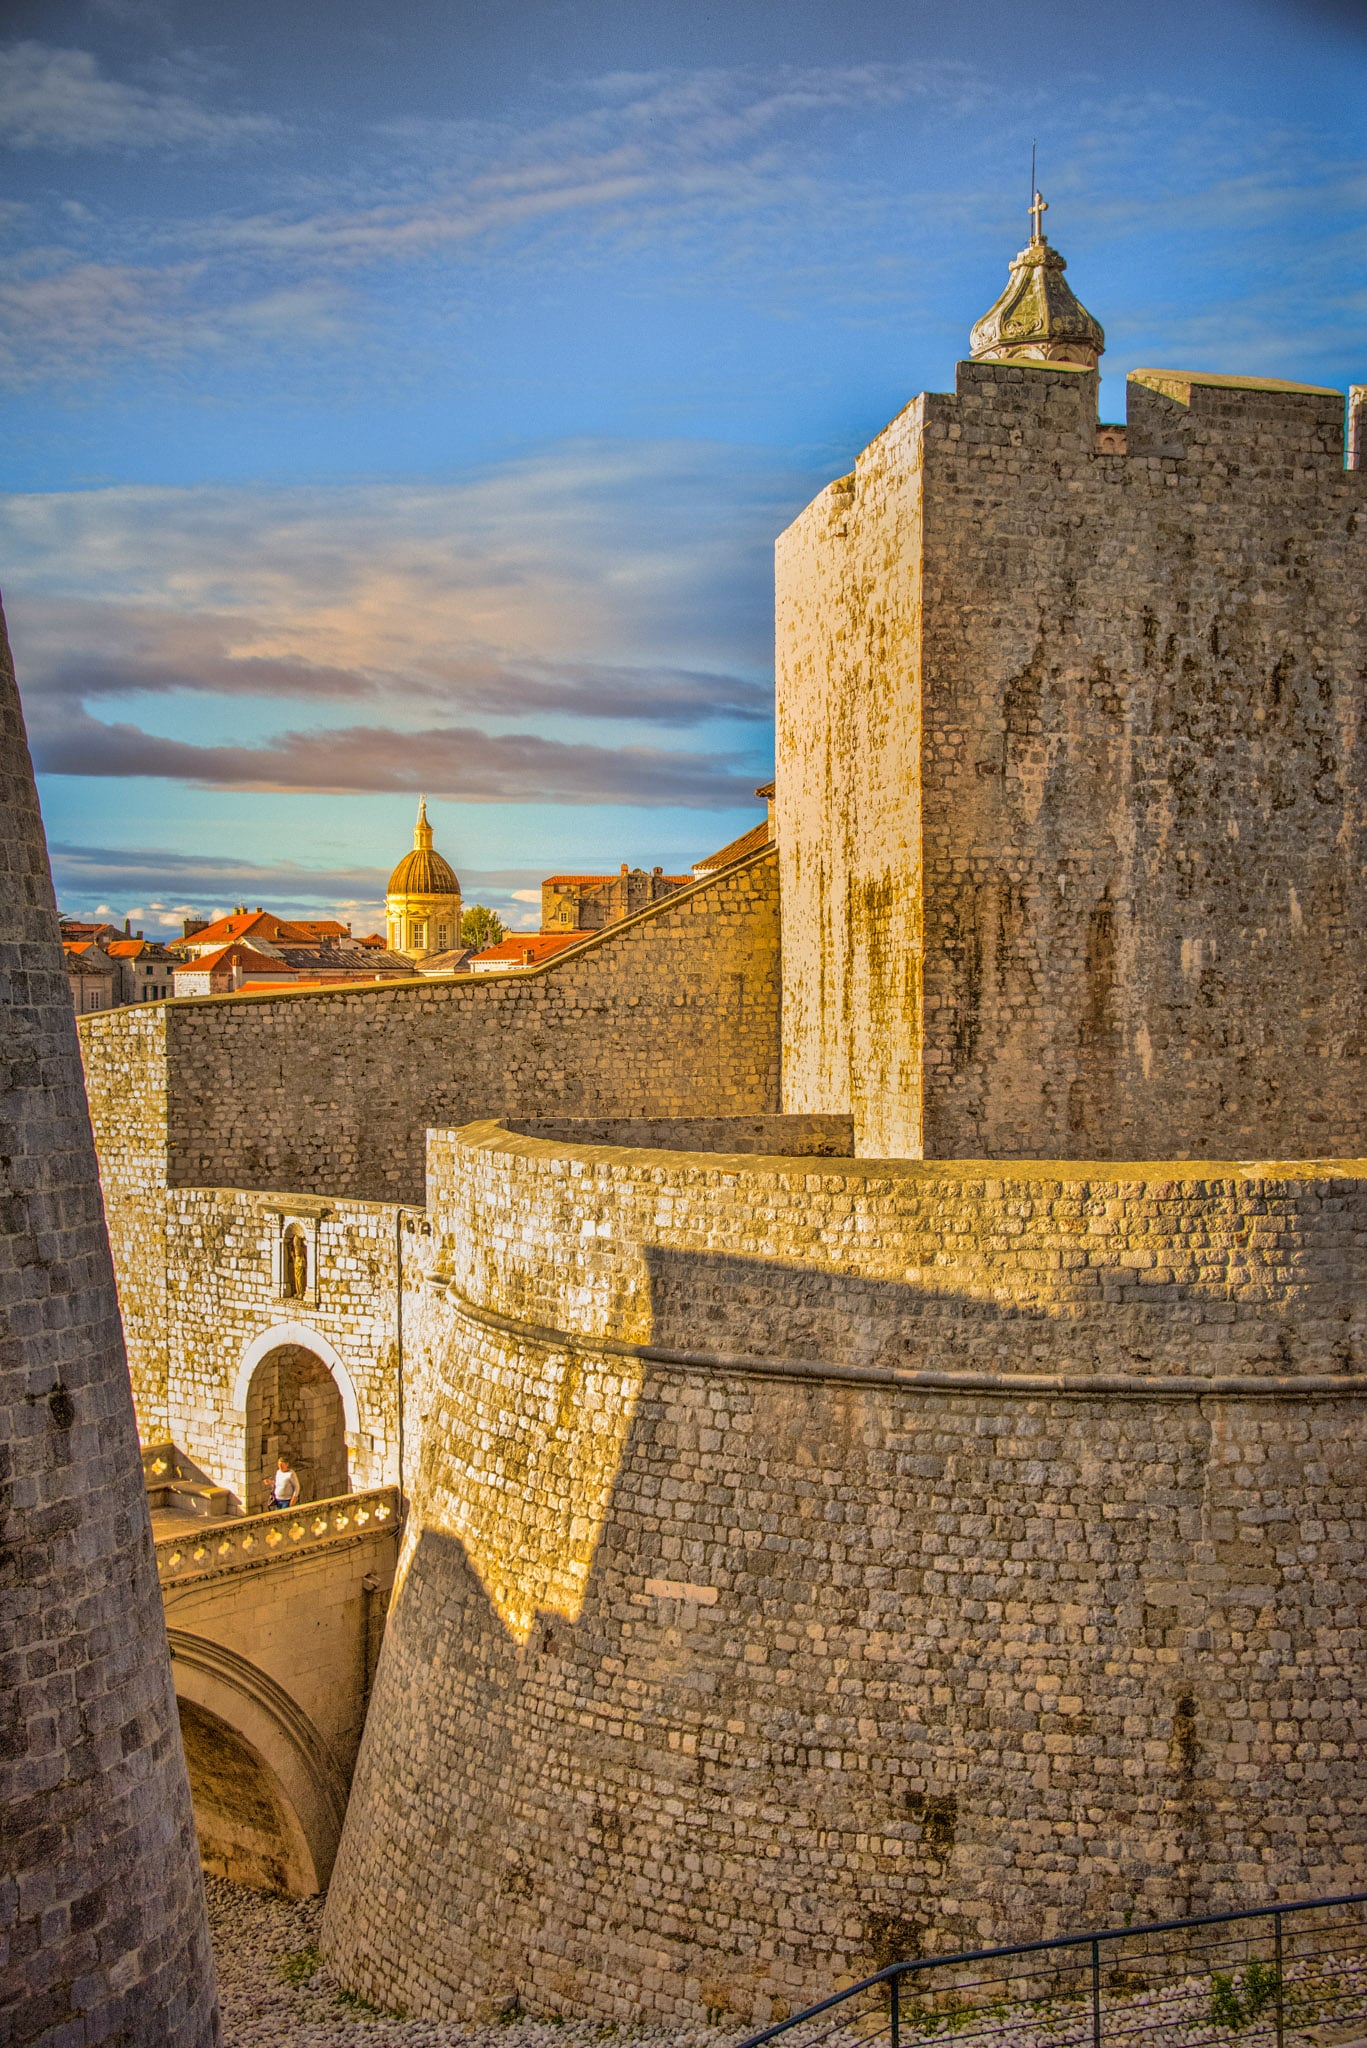 A view of the Ploče gate and Dubrovnik Cathedral as seen from the city wall of Dubrovnik Old Town in Croatia.